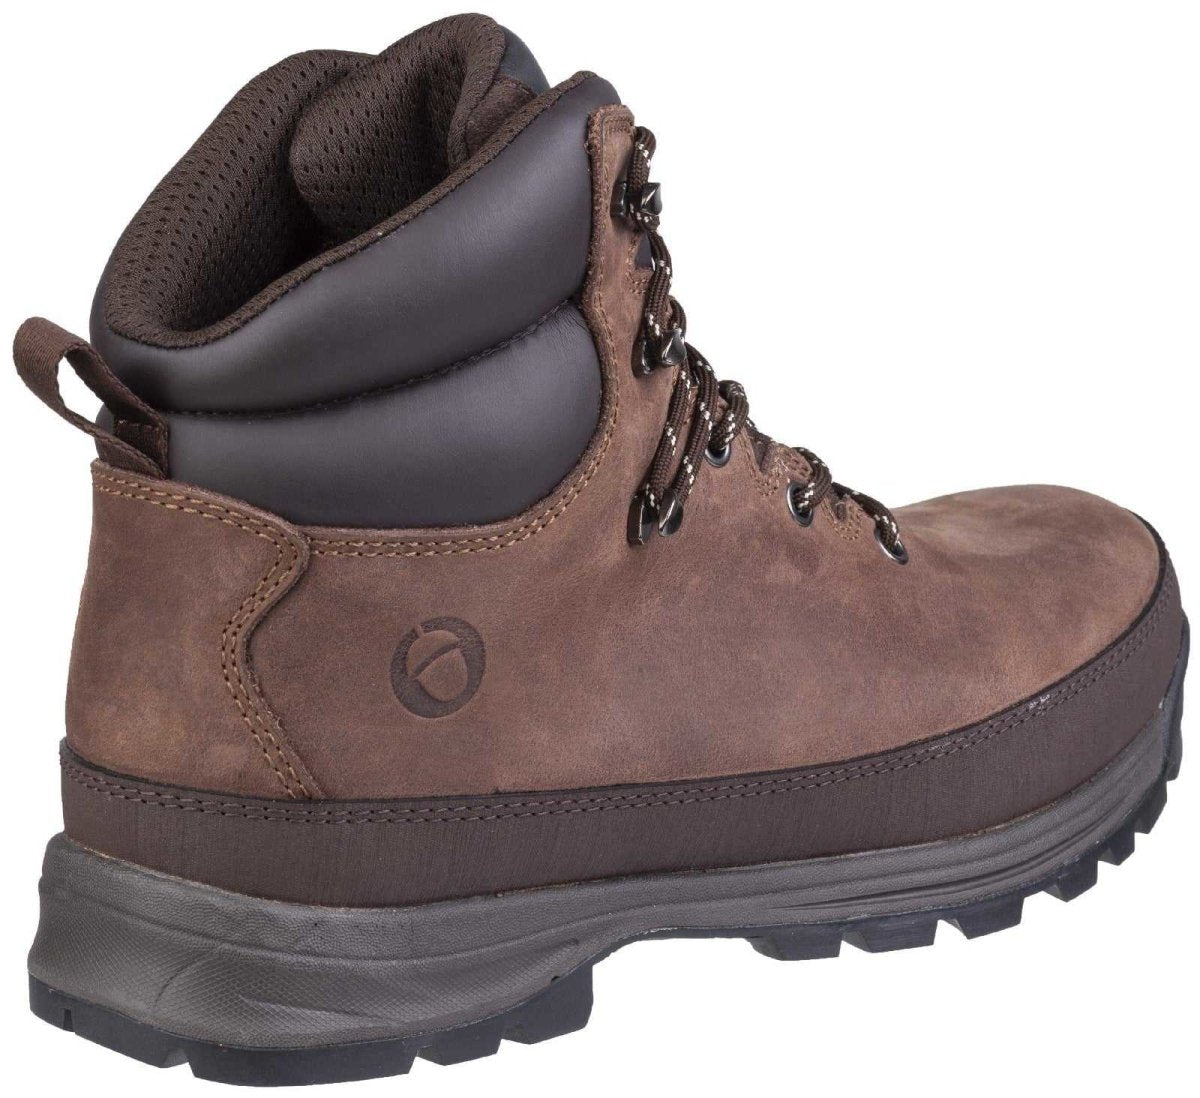 Cotswold Sudgrove Lace Up Boot Mens Hiking Boots - Shoe Store Direct